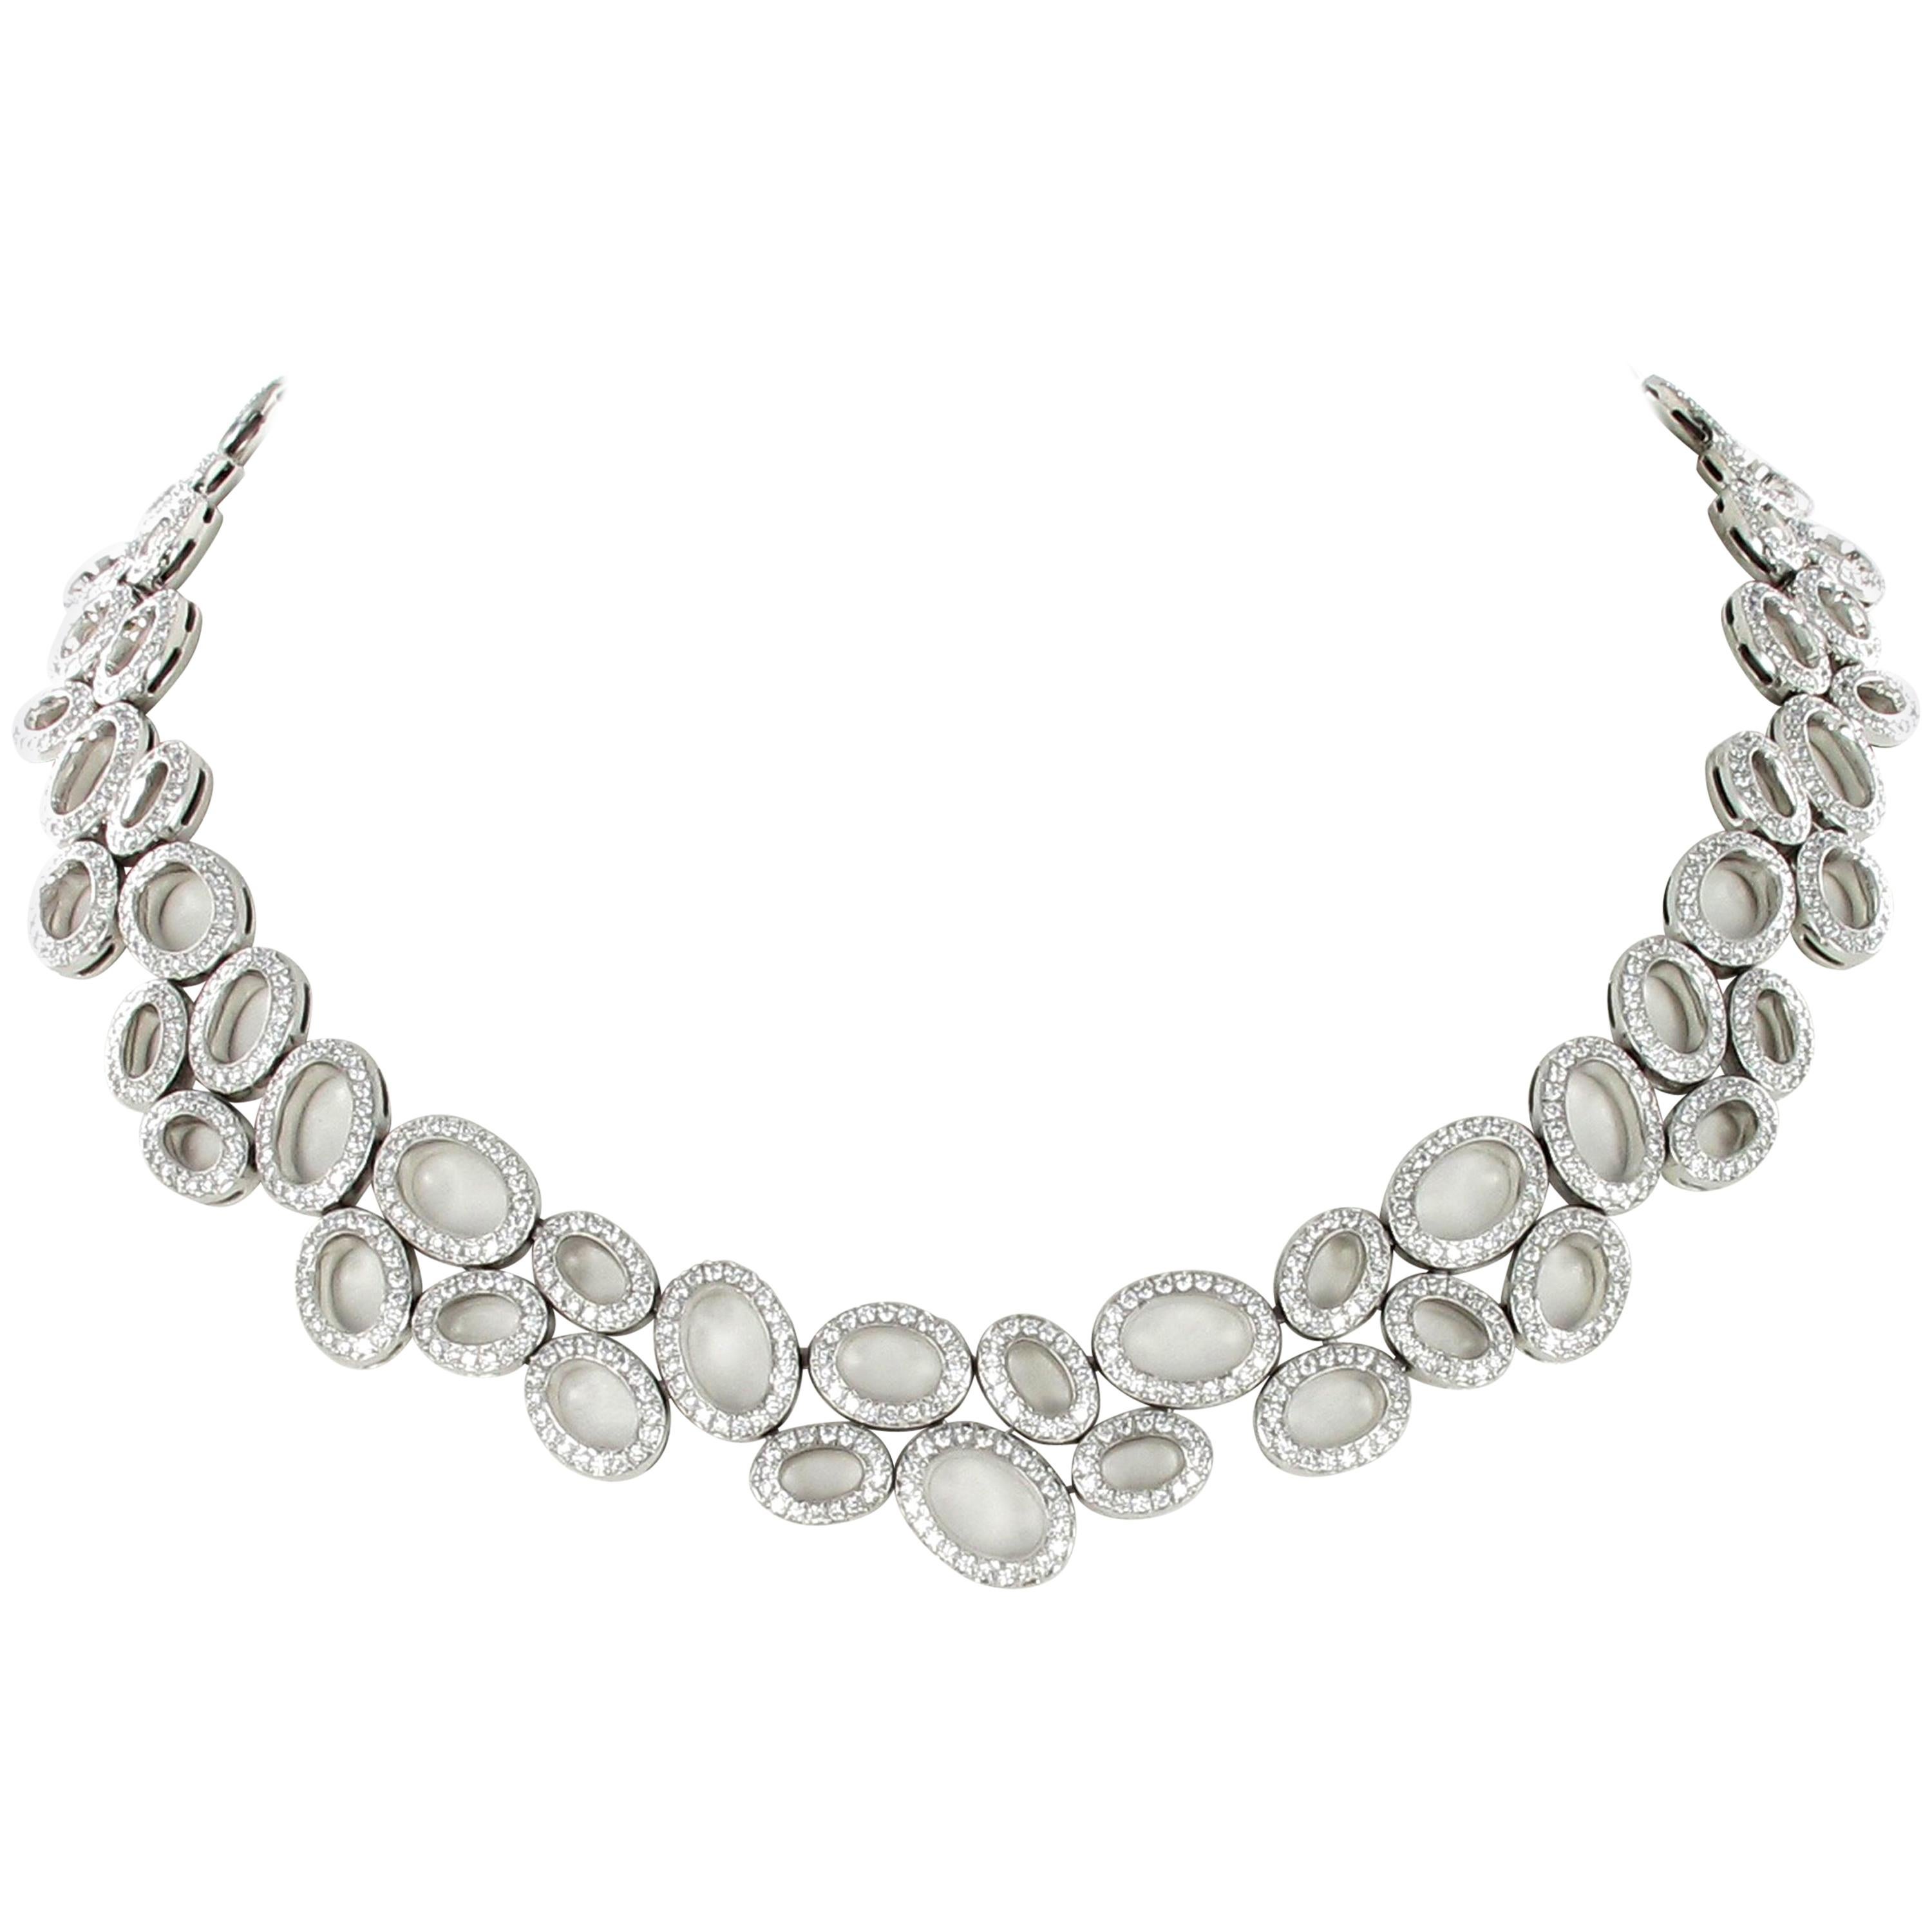 Superb Diamond Necklace in White Gold by Gübelin For Sale